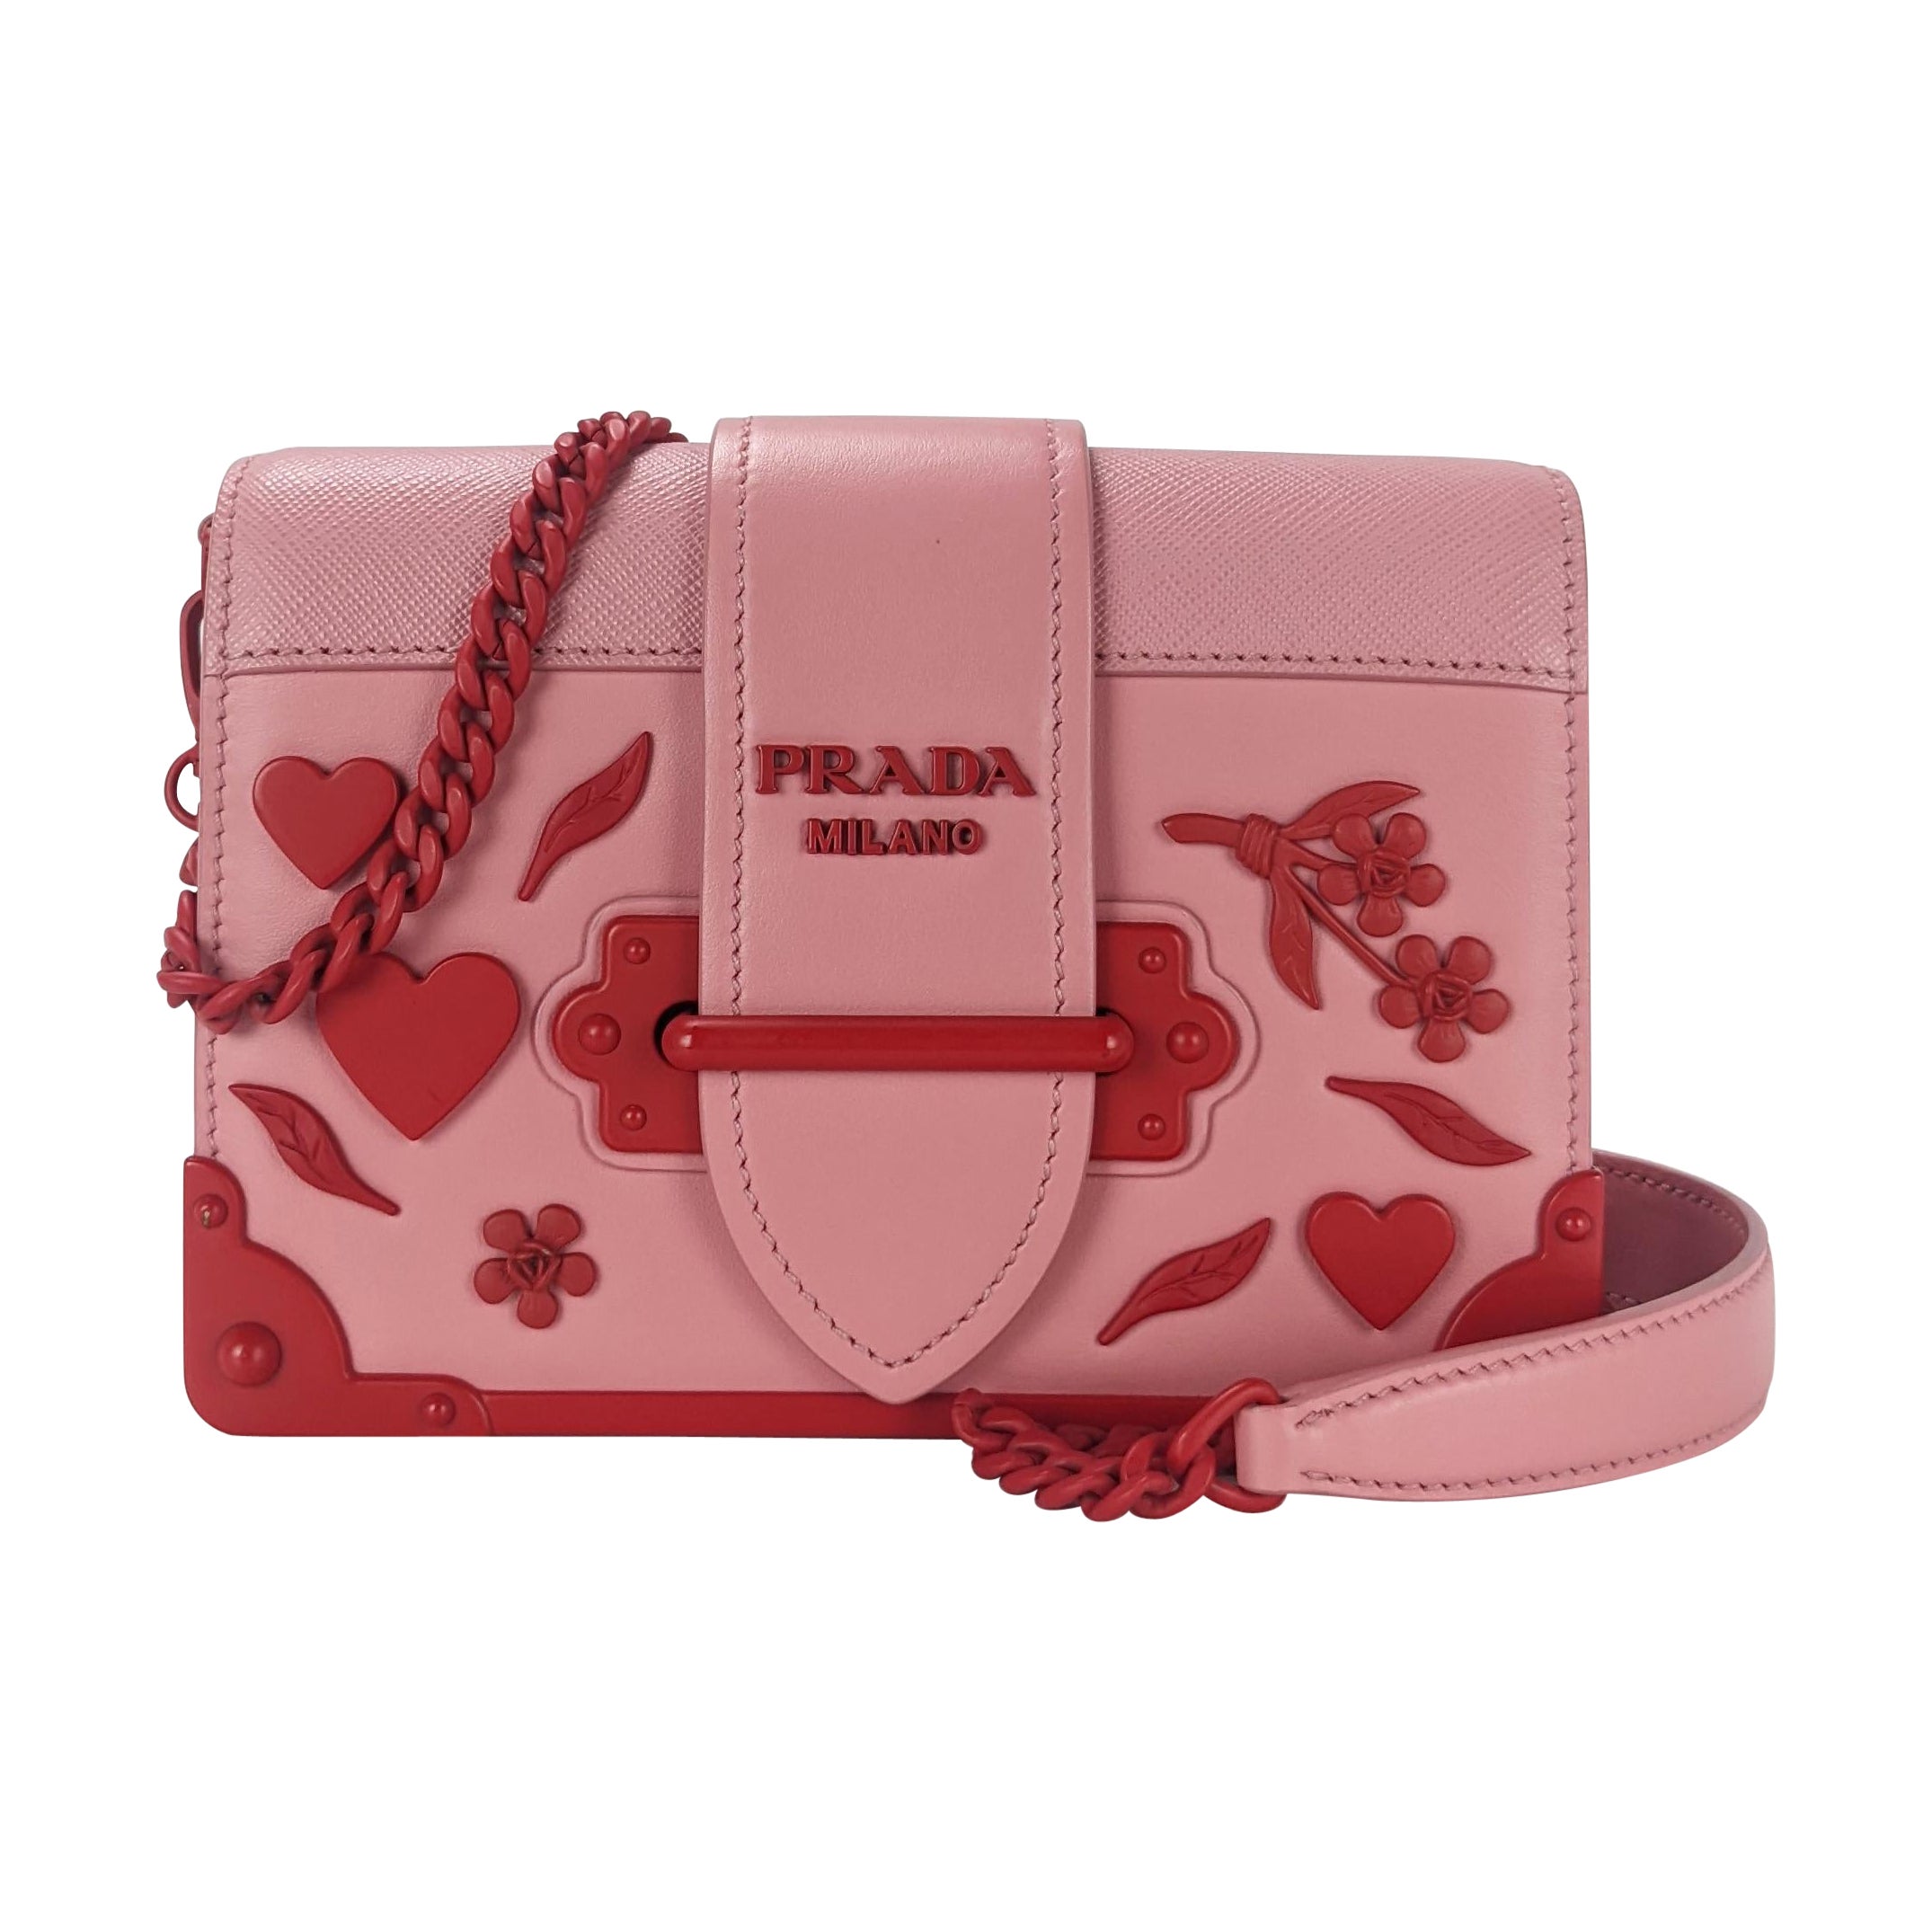 Prada Saffiano Leather Wallet With Shoulder Strap - Pink